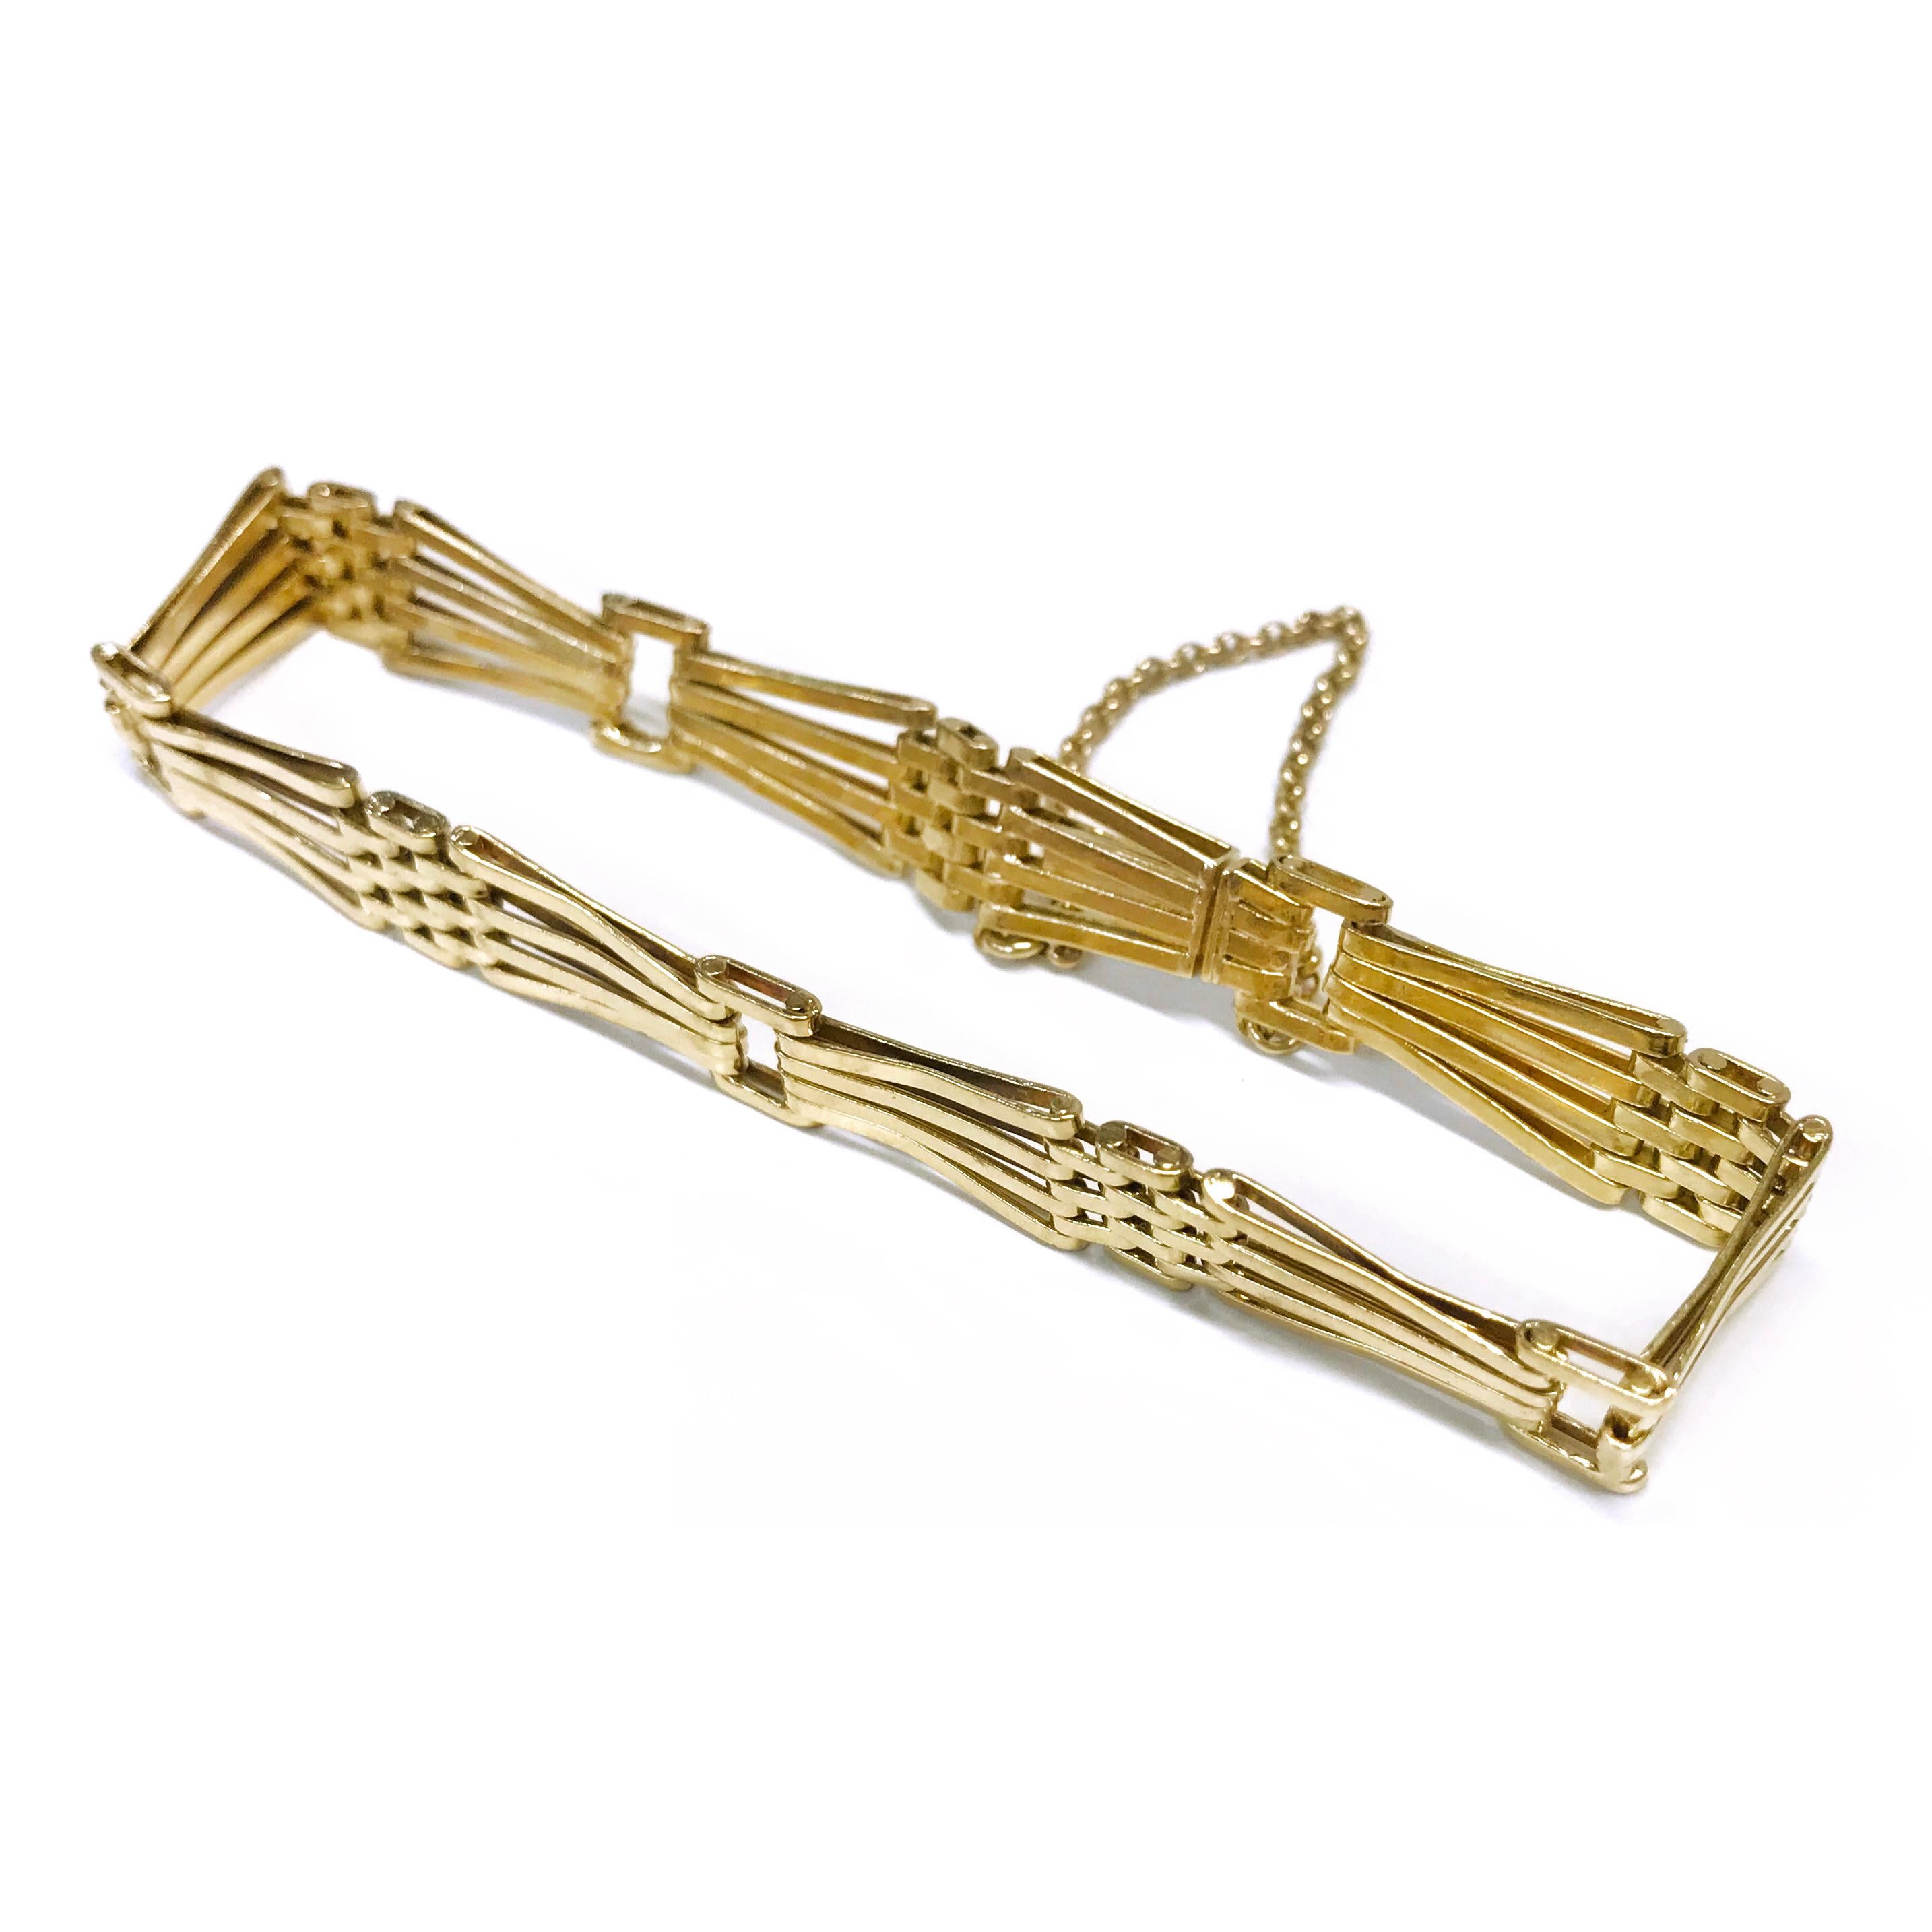 18 Karat Gold Link Bracelet. The handmade bracelet features yellow gold tapered double links, open square links, and smaller rectangular links. The bracelet width ranges from 8.5mm to 7.3mm and it's 7 1/4